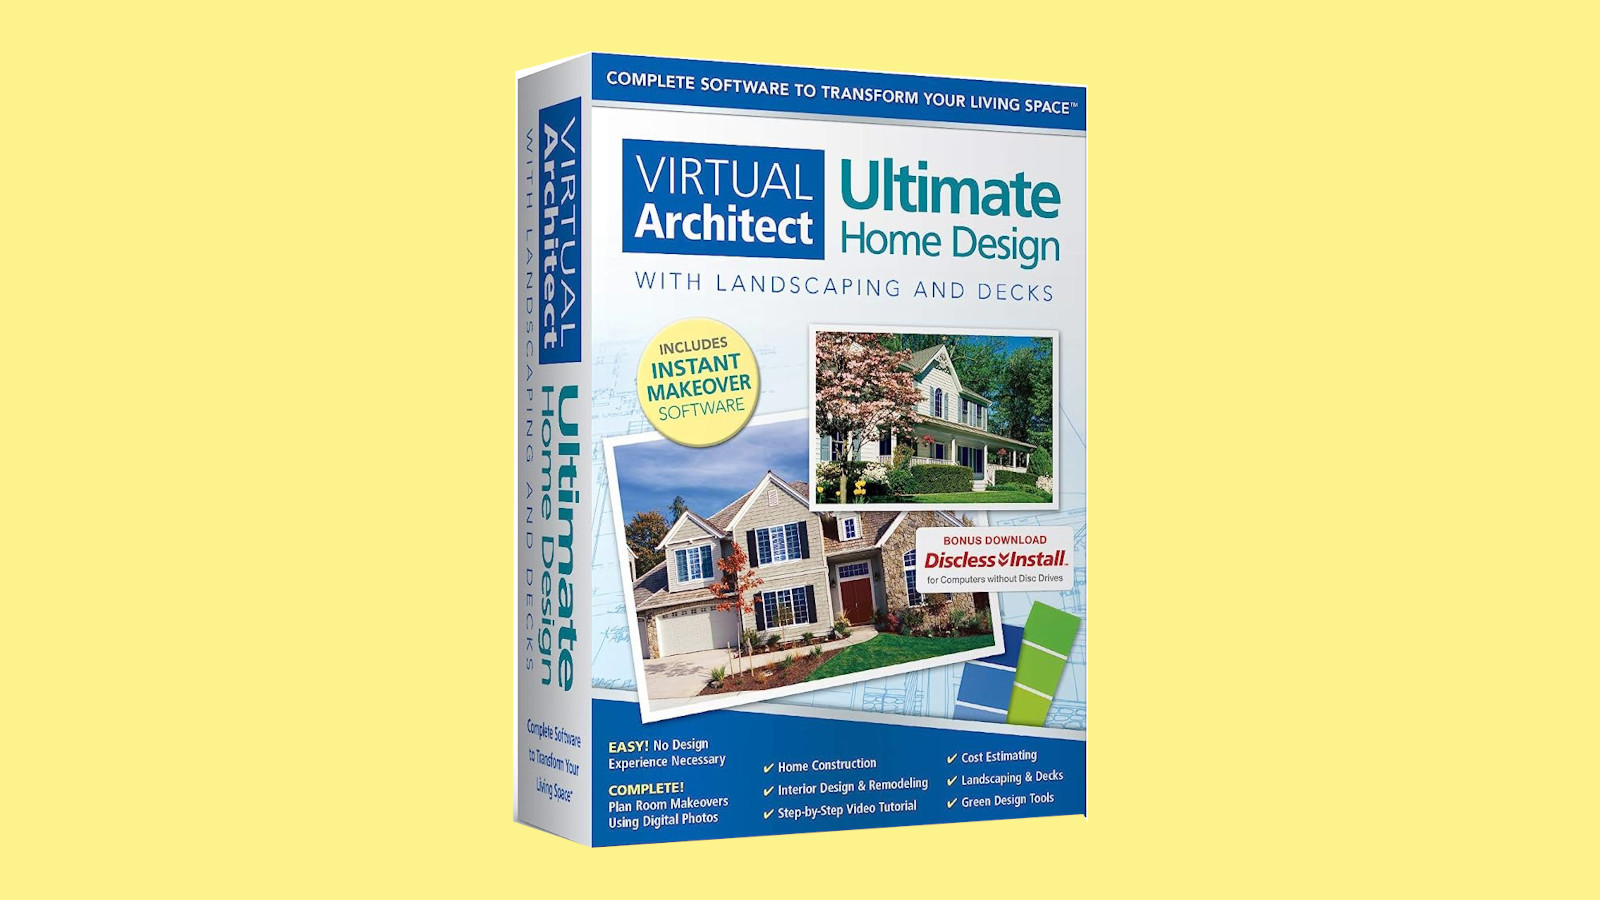 Virtual Architect Ultimate Home Design with Landscaping and Decks CD Key 77.68 $